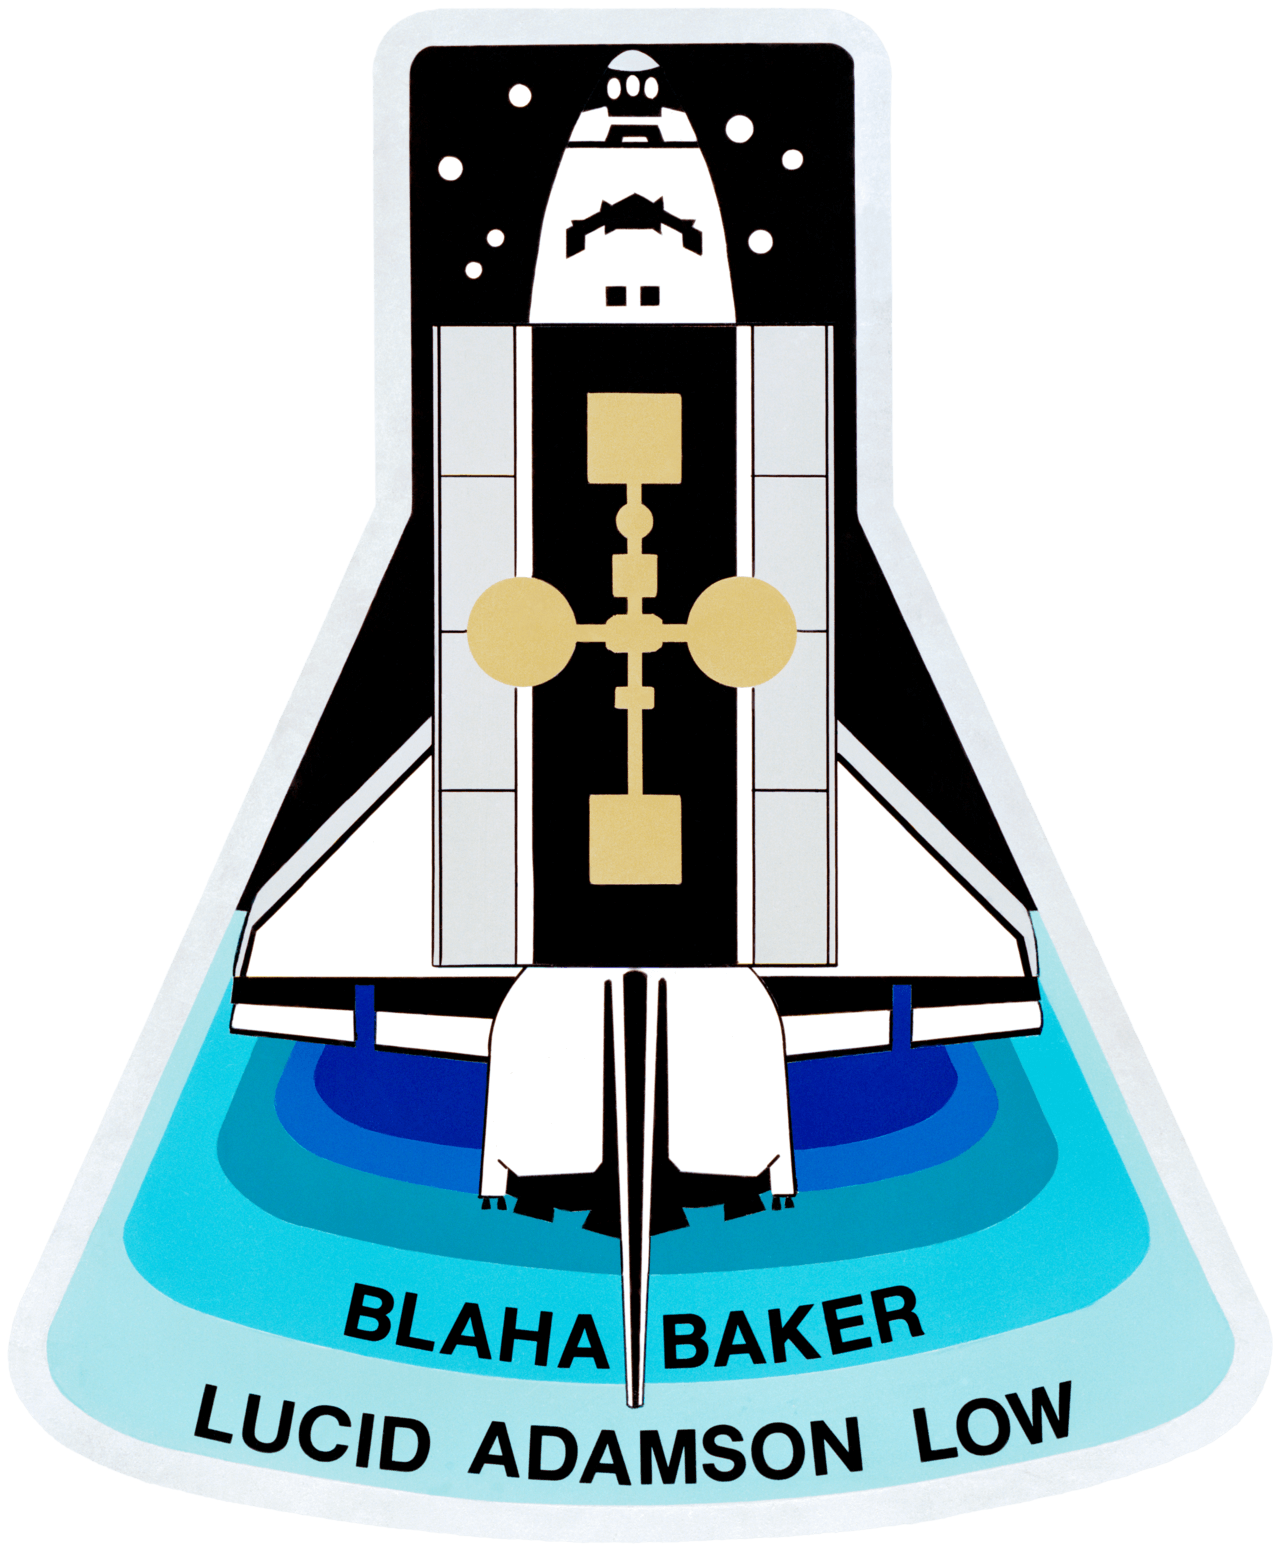 Mission patch for STS-43